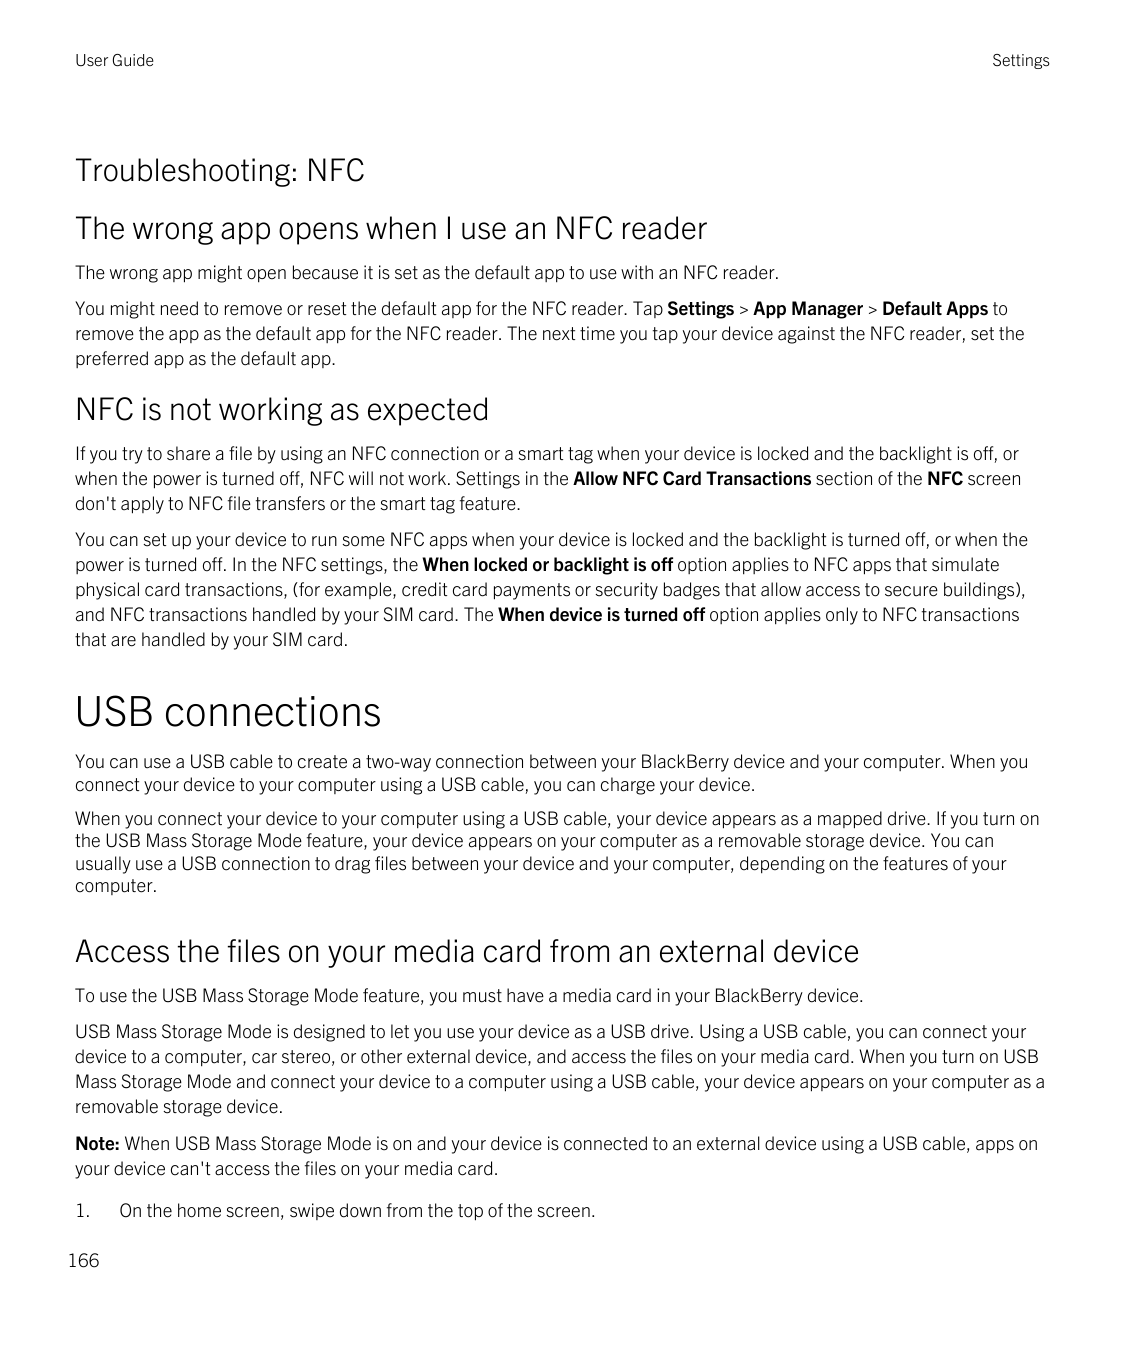 User GuideSettingsTroubleshooting: NFCThe wrong app opens when I use an NFC readerThe wrong app might open because it is set as 